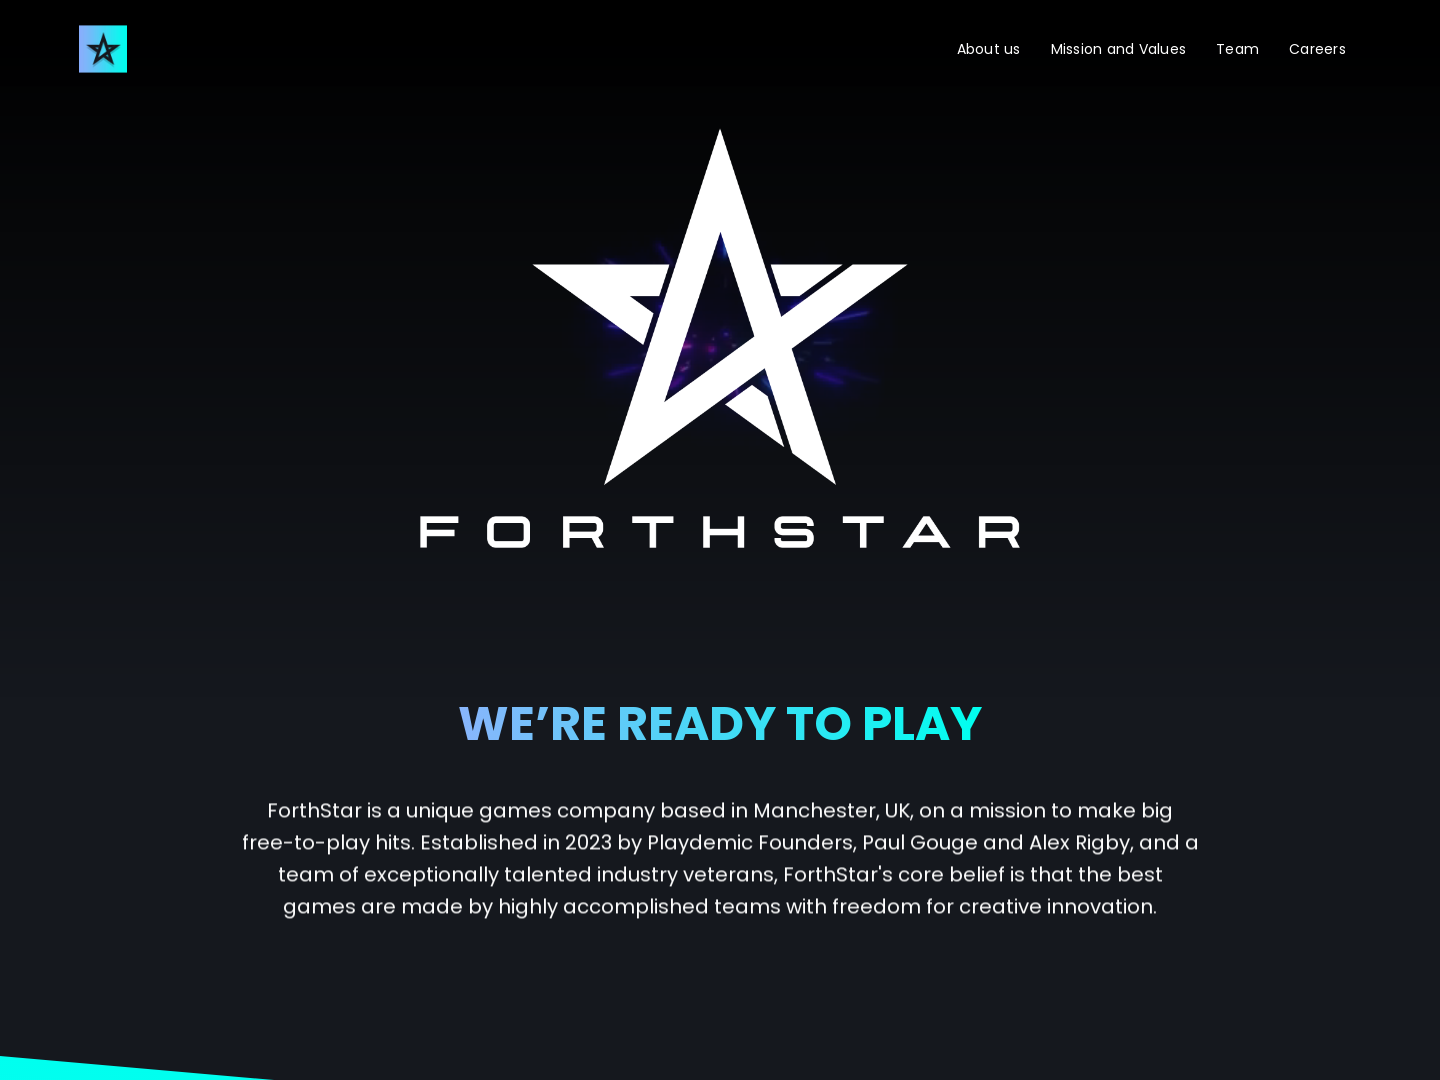 "ForthStar: Building Exceptional Games with $10 Million Funding"